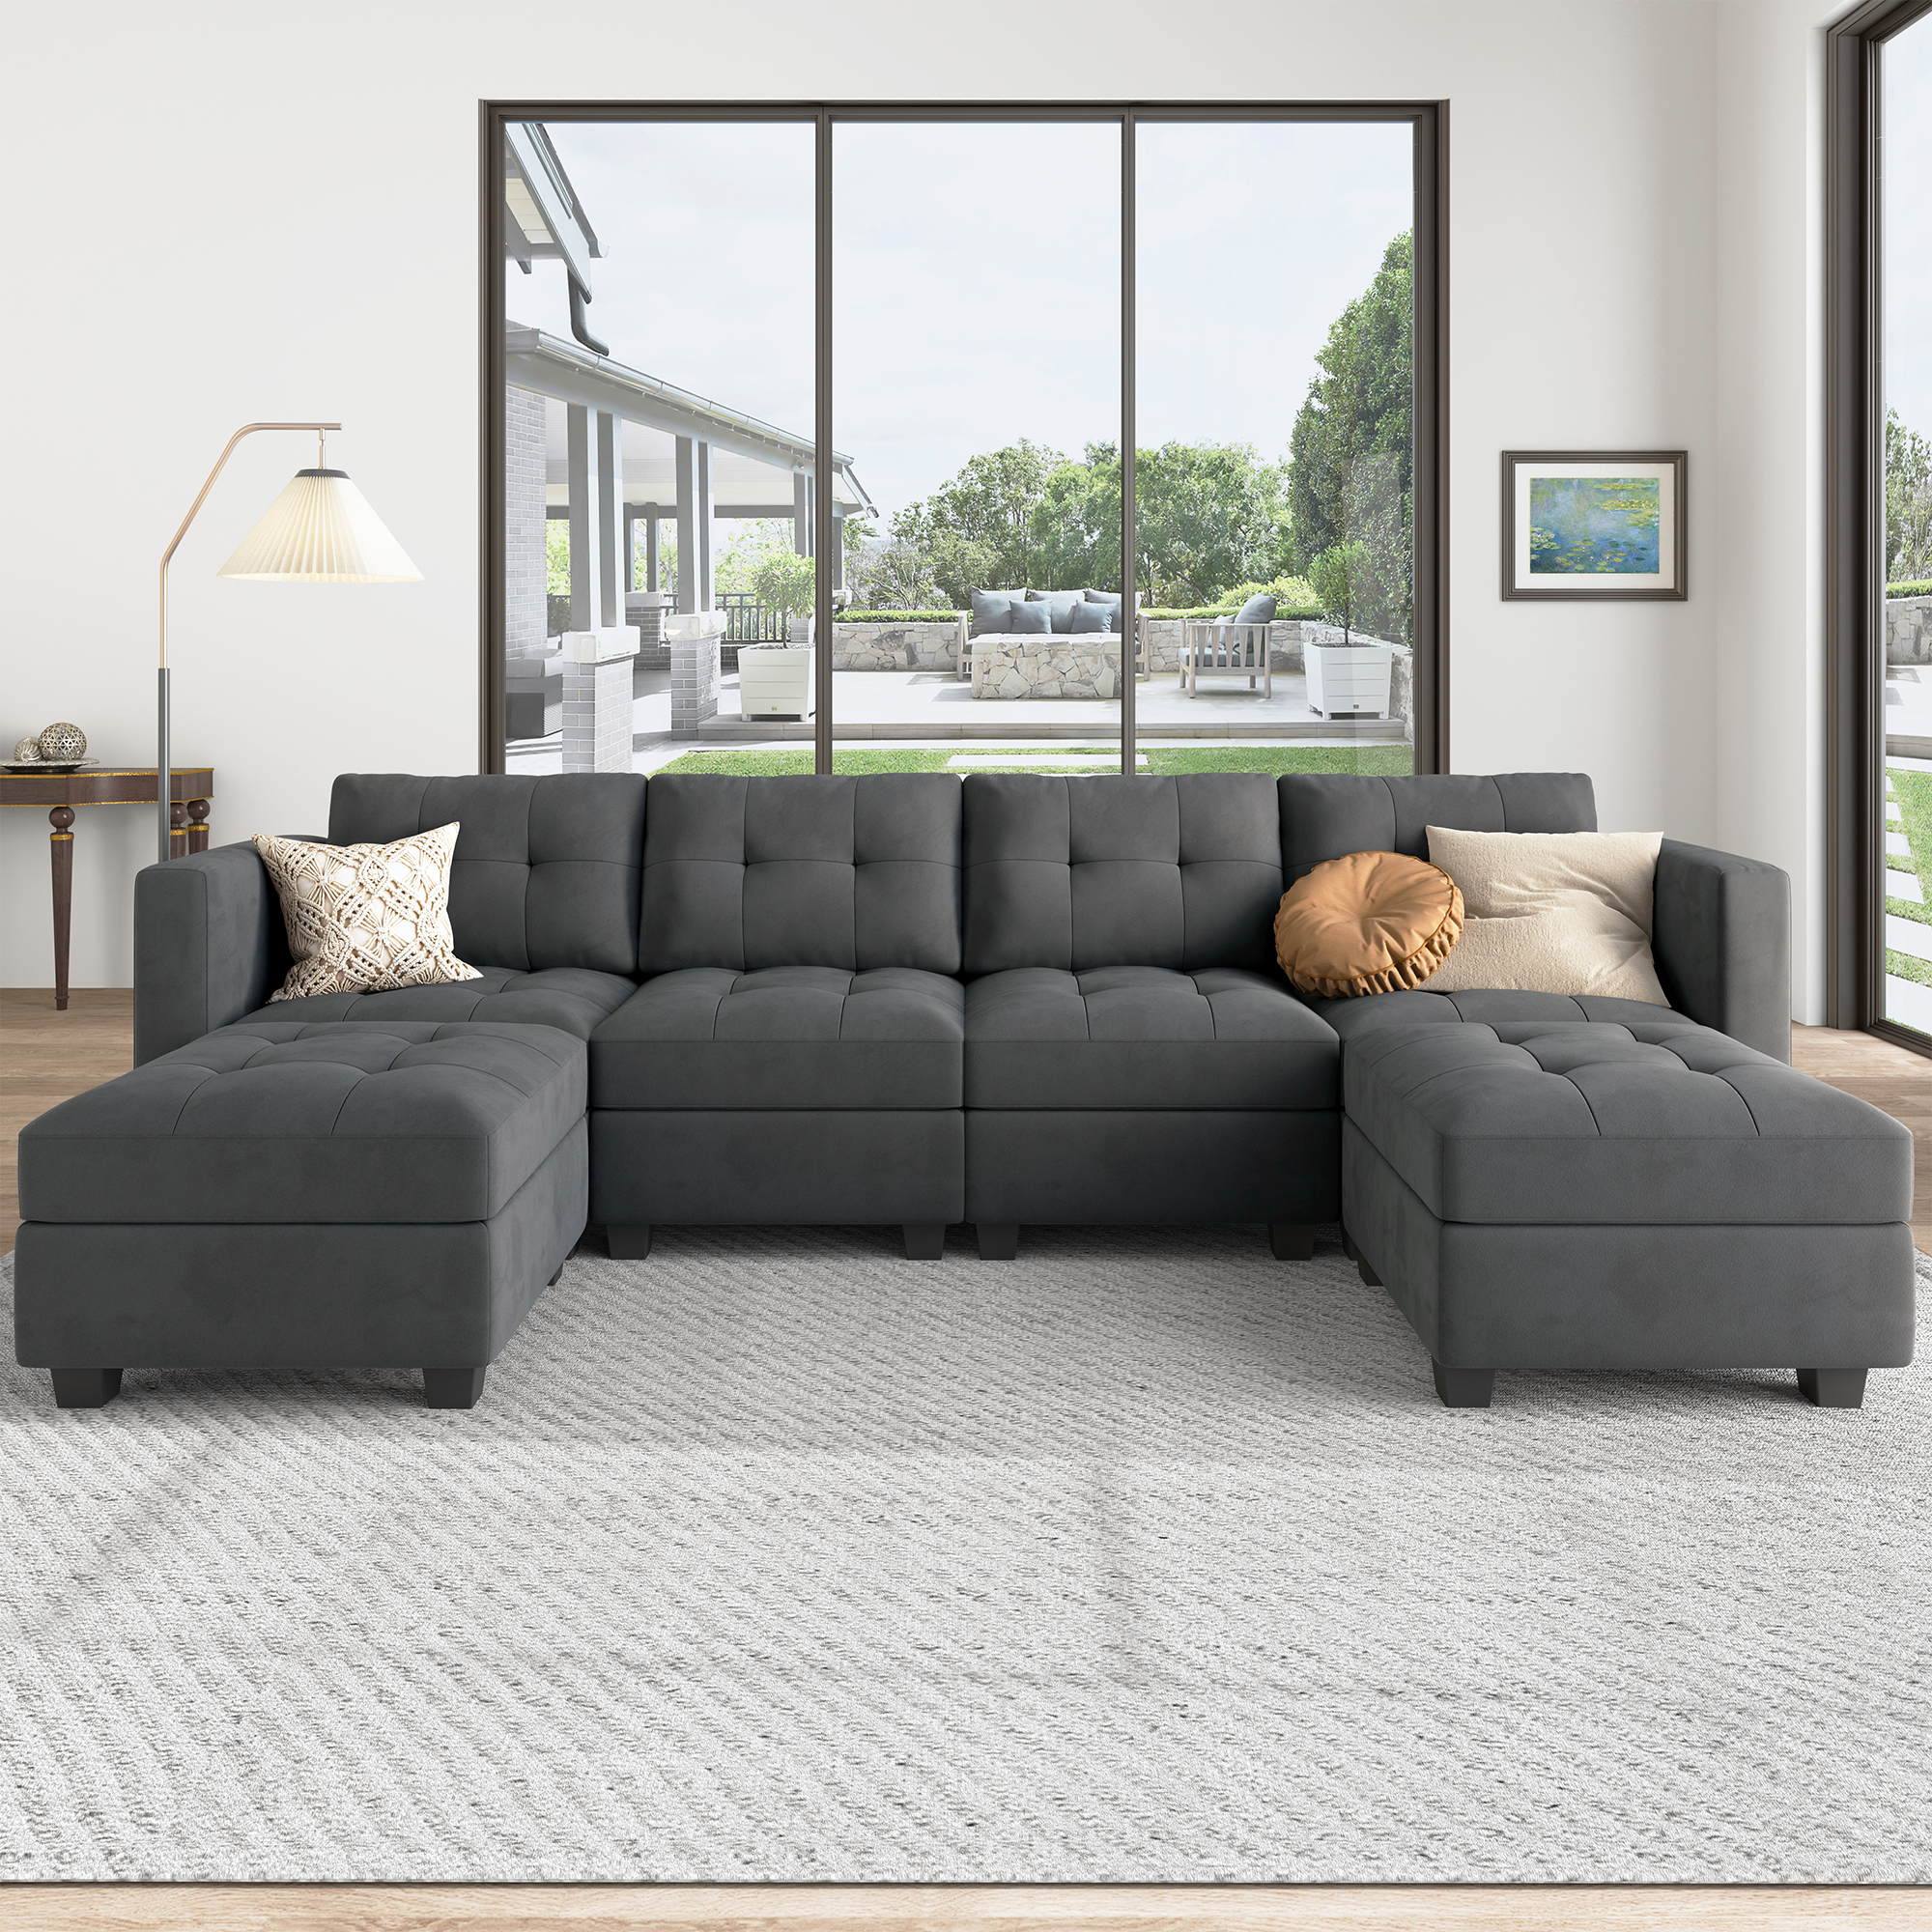 HONBAY 6-Piece Velvet Modular Sectional With Storage Seat